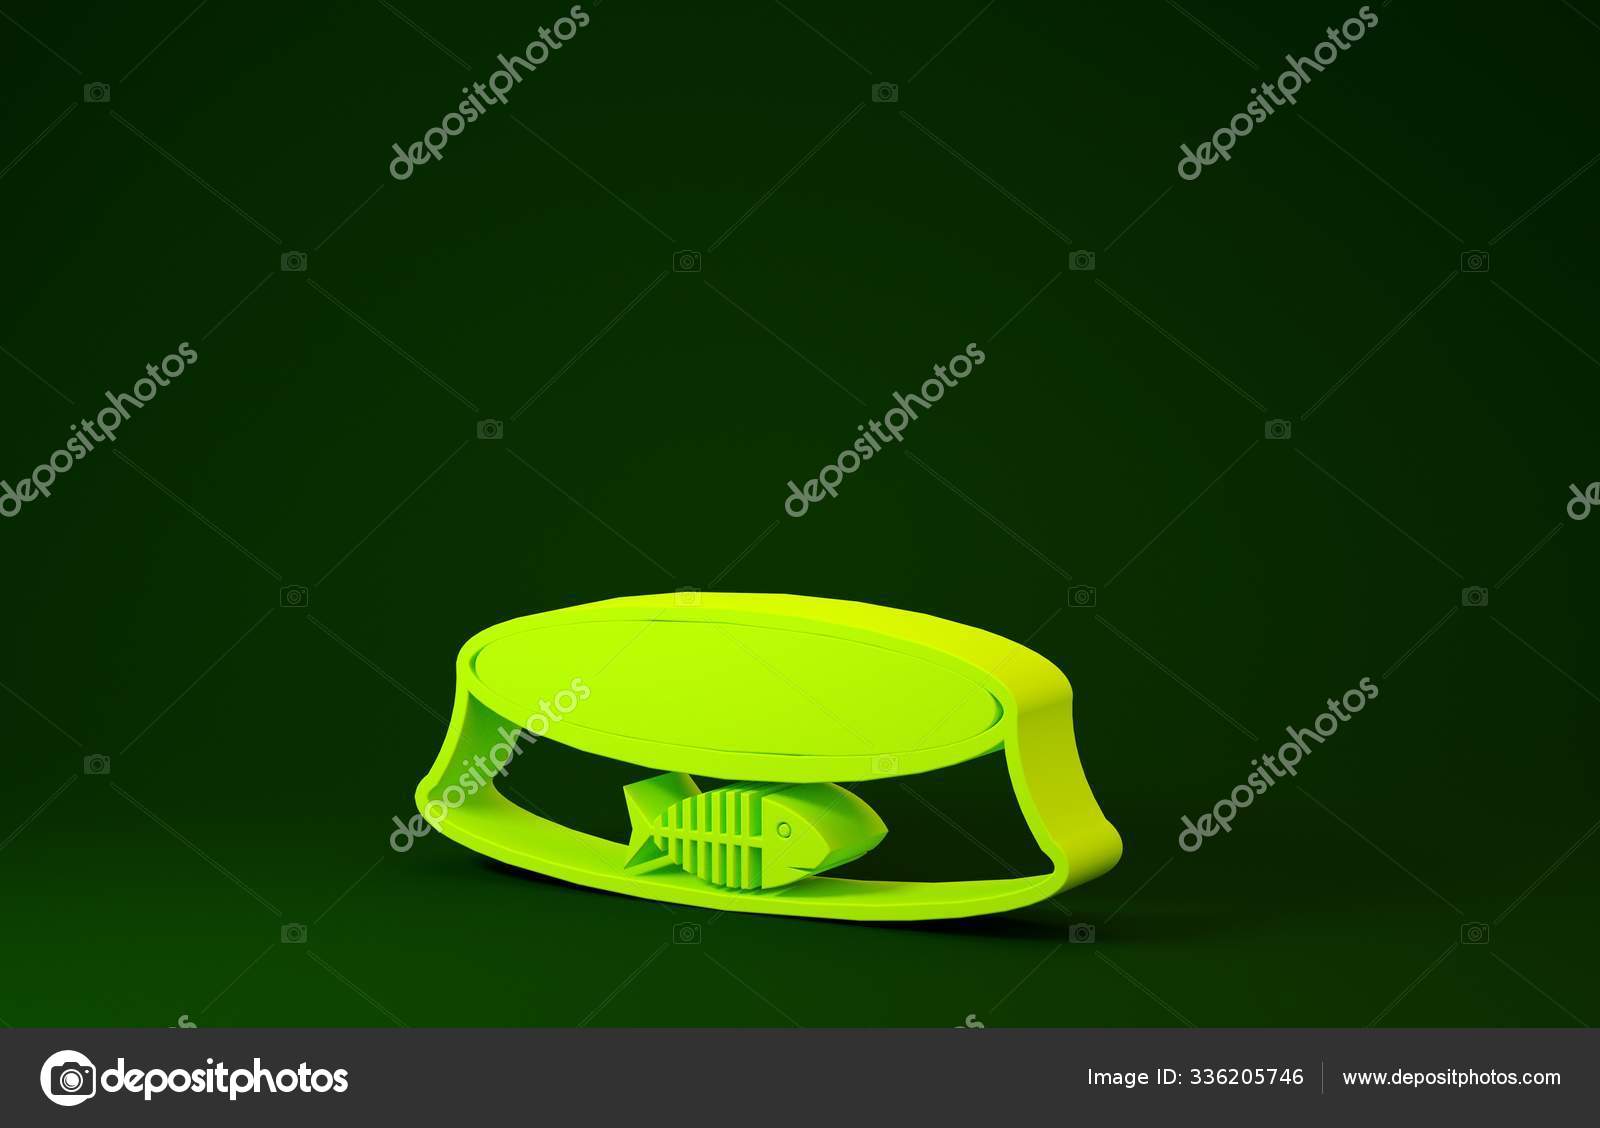 Download Yellow Pet Food Bowl For Cat Or Dog Icon Isolated On Green Background Fish Skeleton Sign Minimalism Concept 3d Illustration 3d Render Stock Photo C Vectorvalera Gmail Com 336205746 Yellowimages Mockups